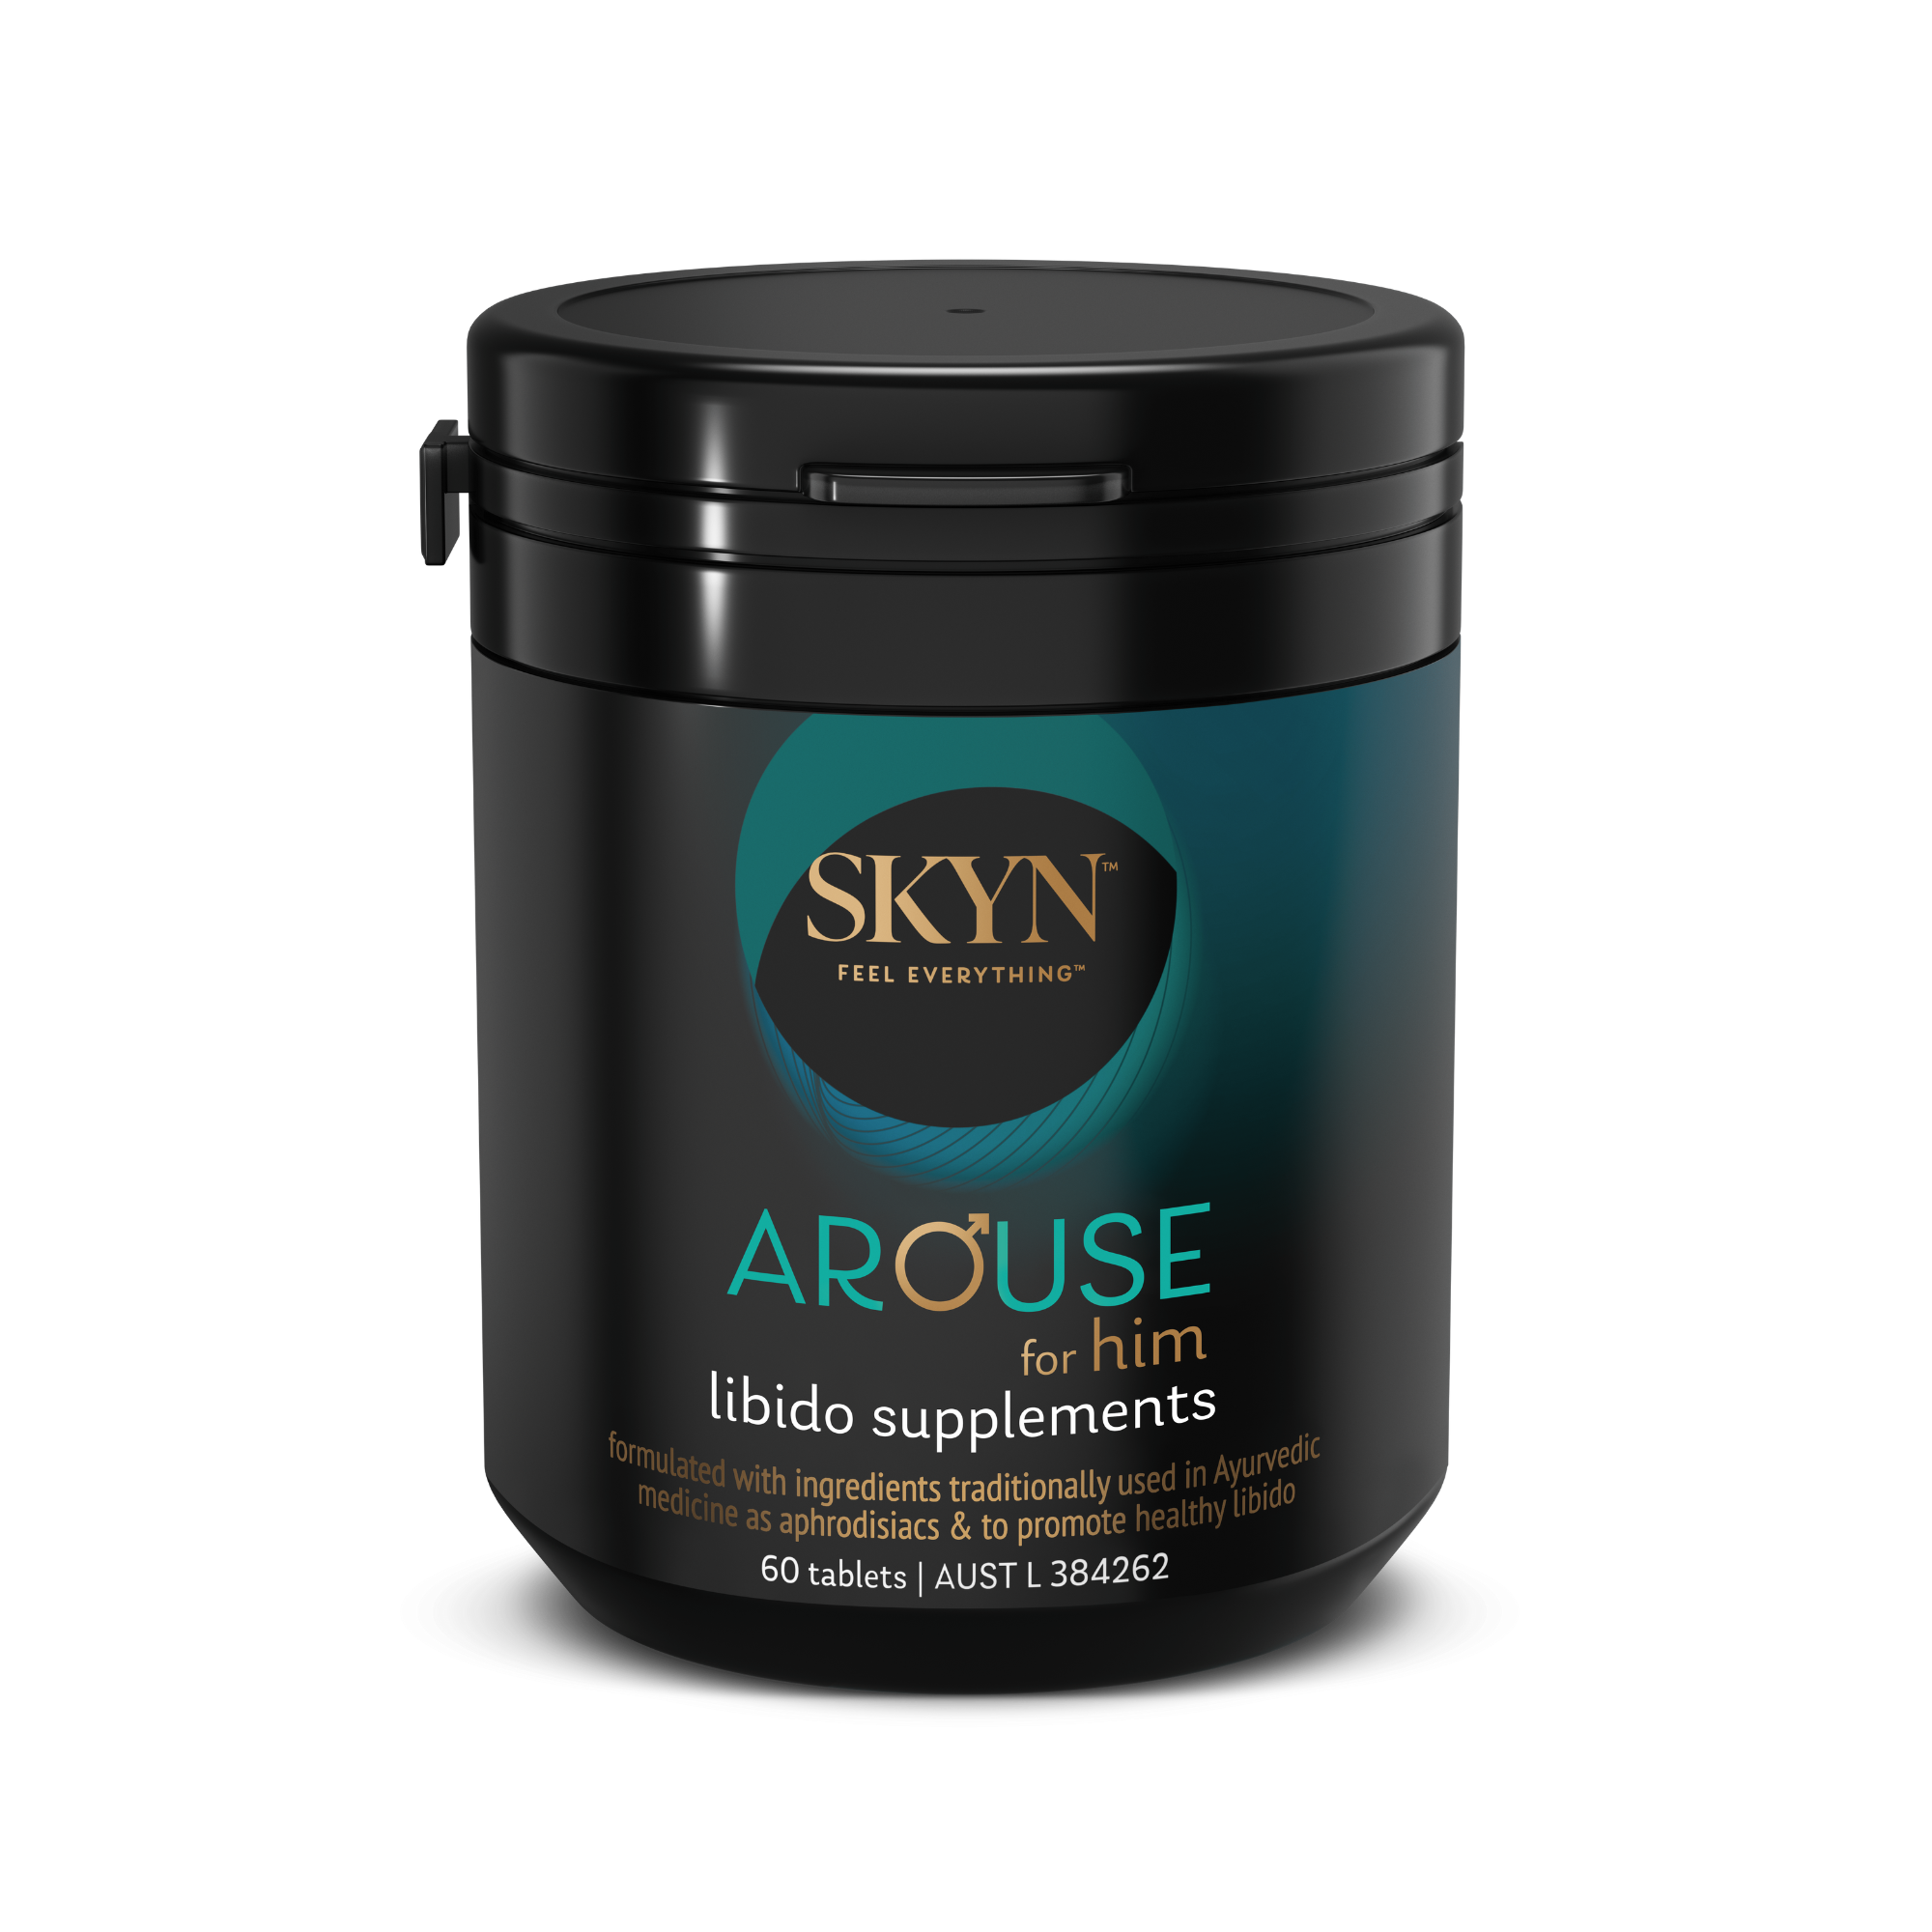 SKYN™ Arouse for Him Libido Supplements